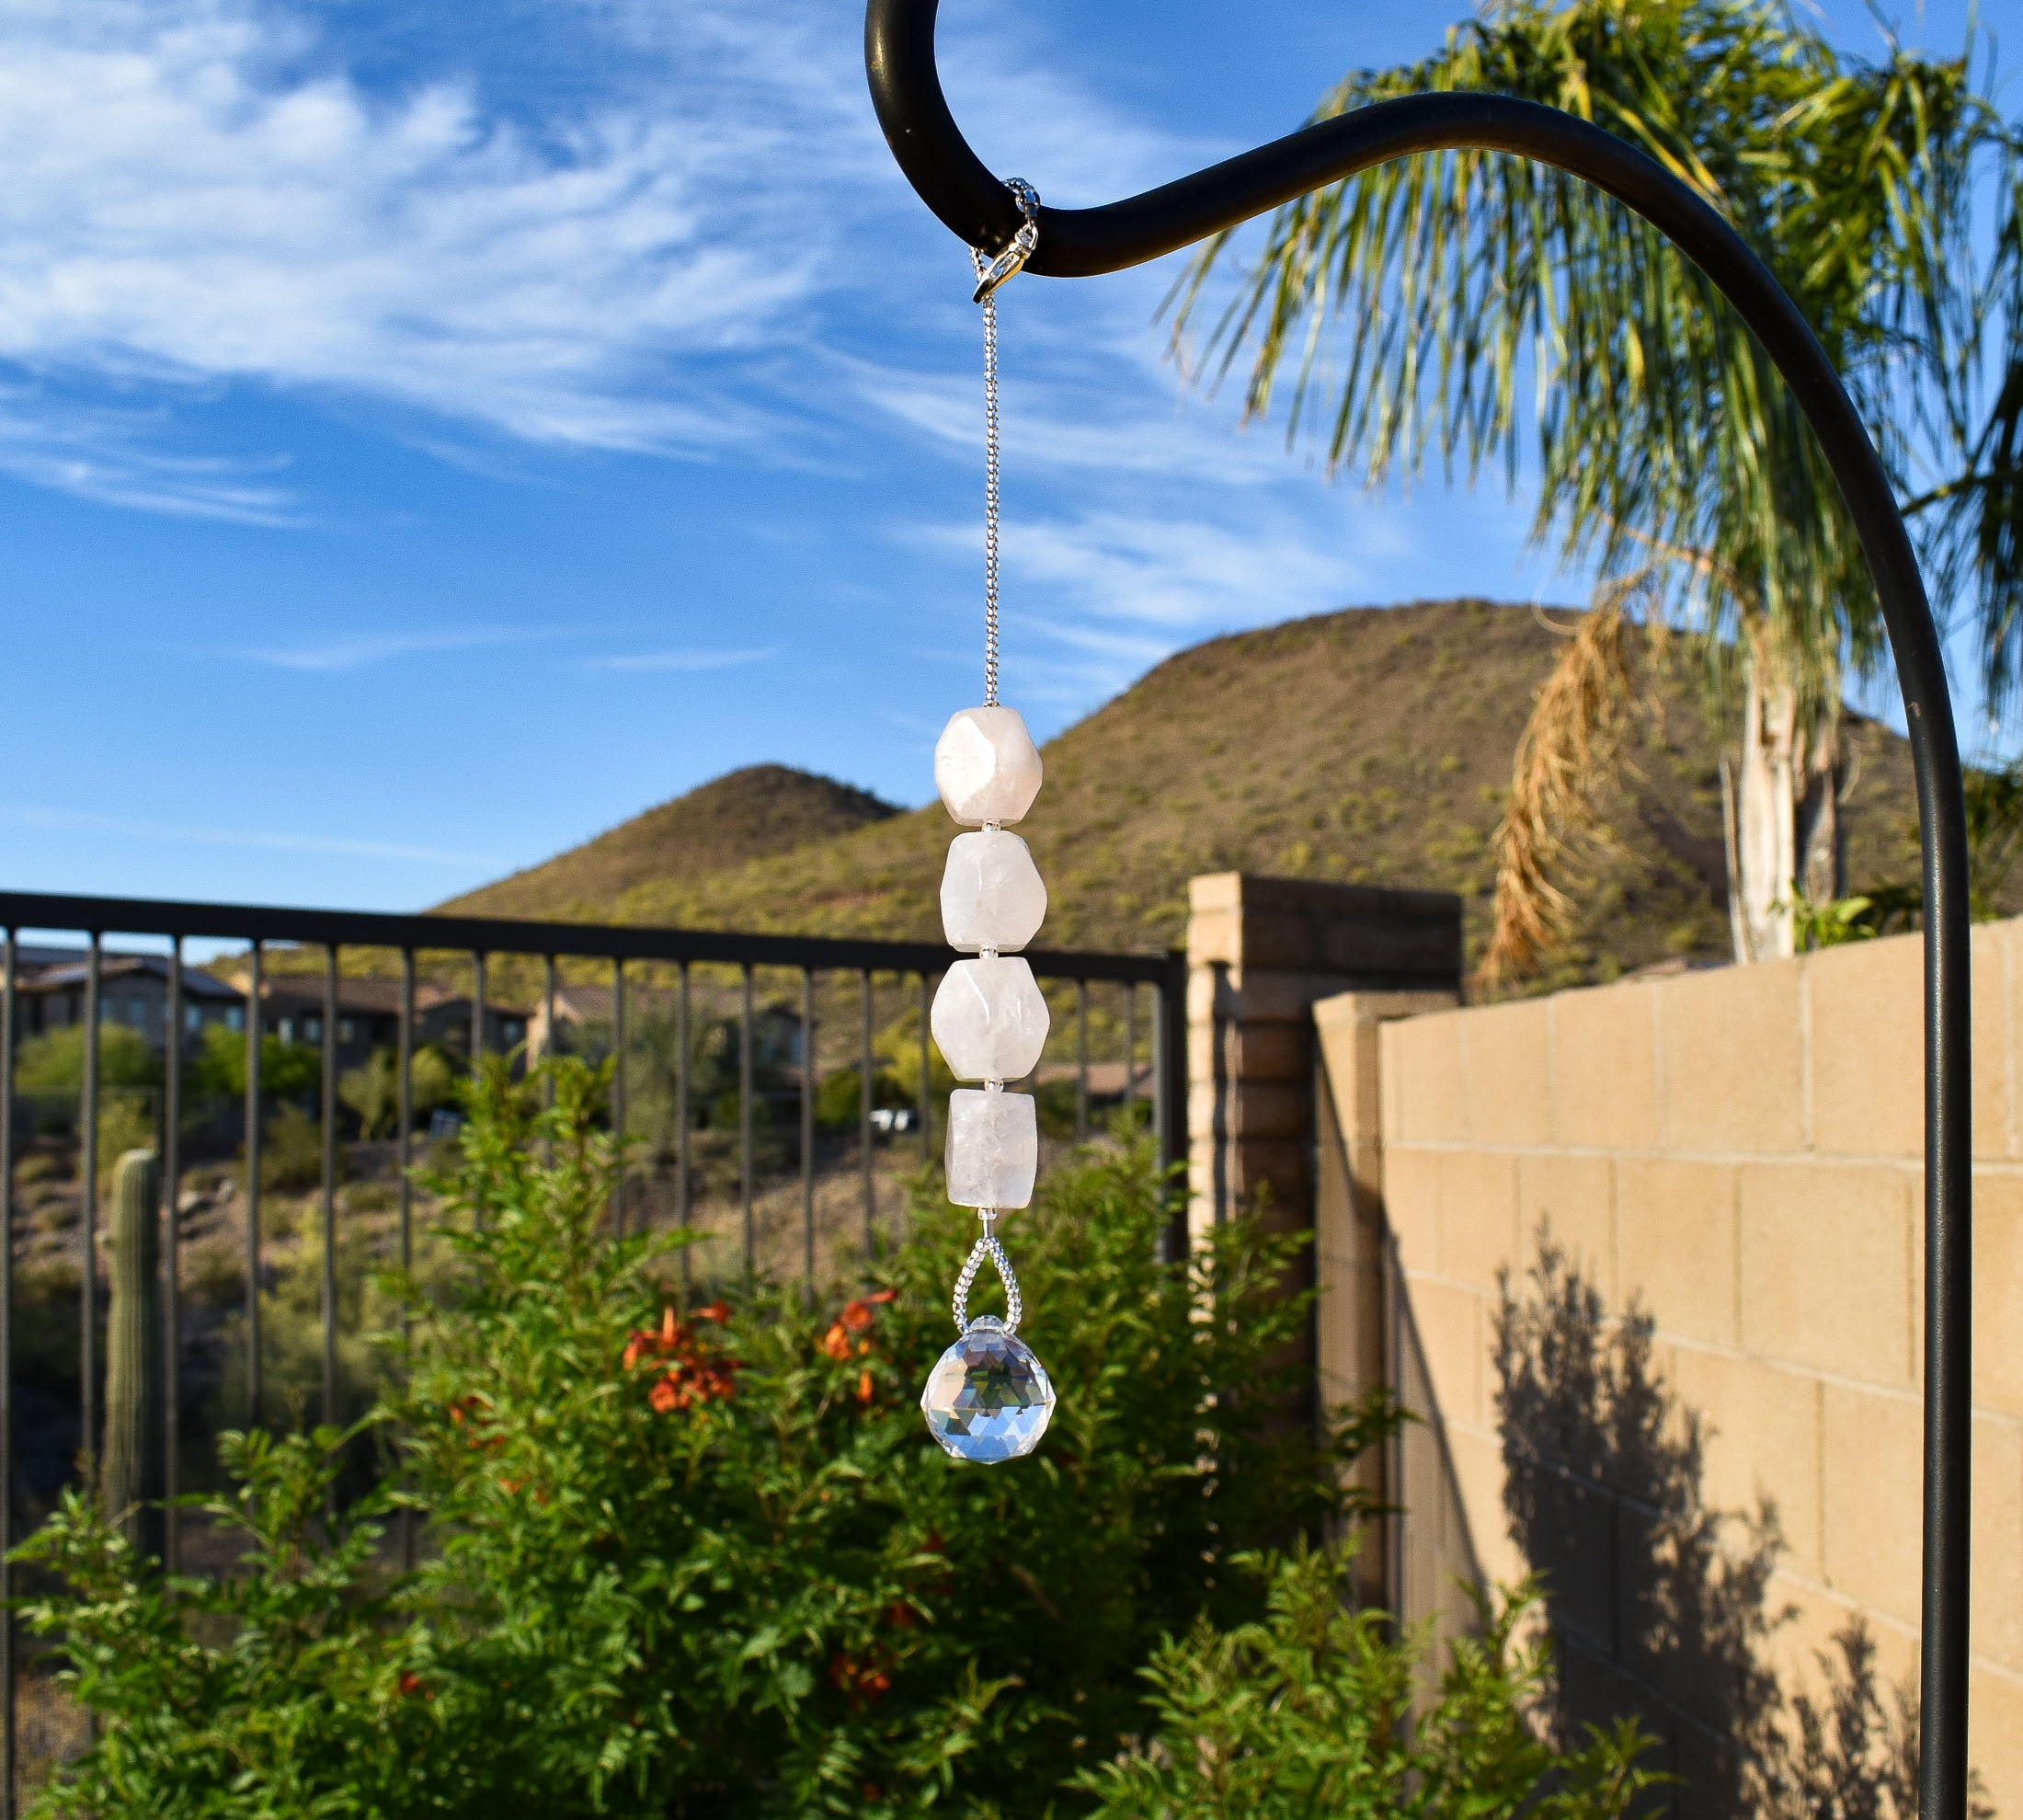 Four rose quartz stones strung vertically with a small round crystal prism at the bottom, in a suburban setting.